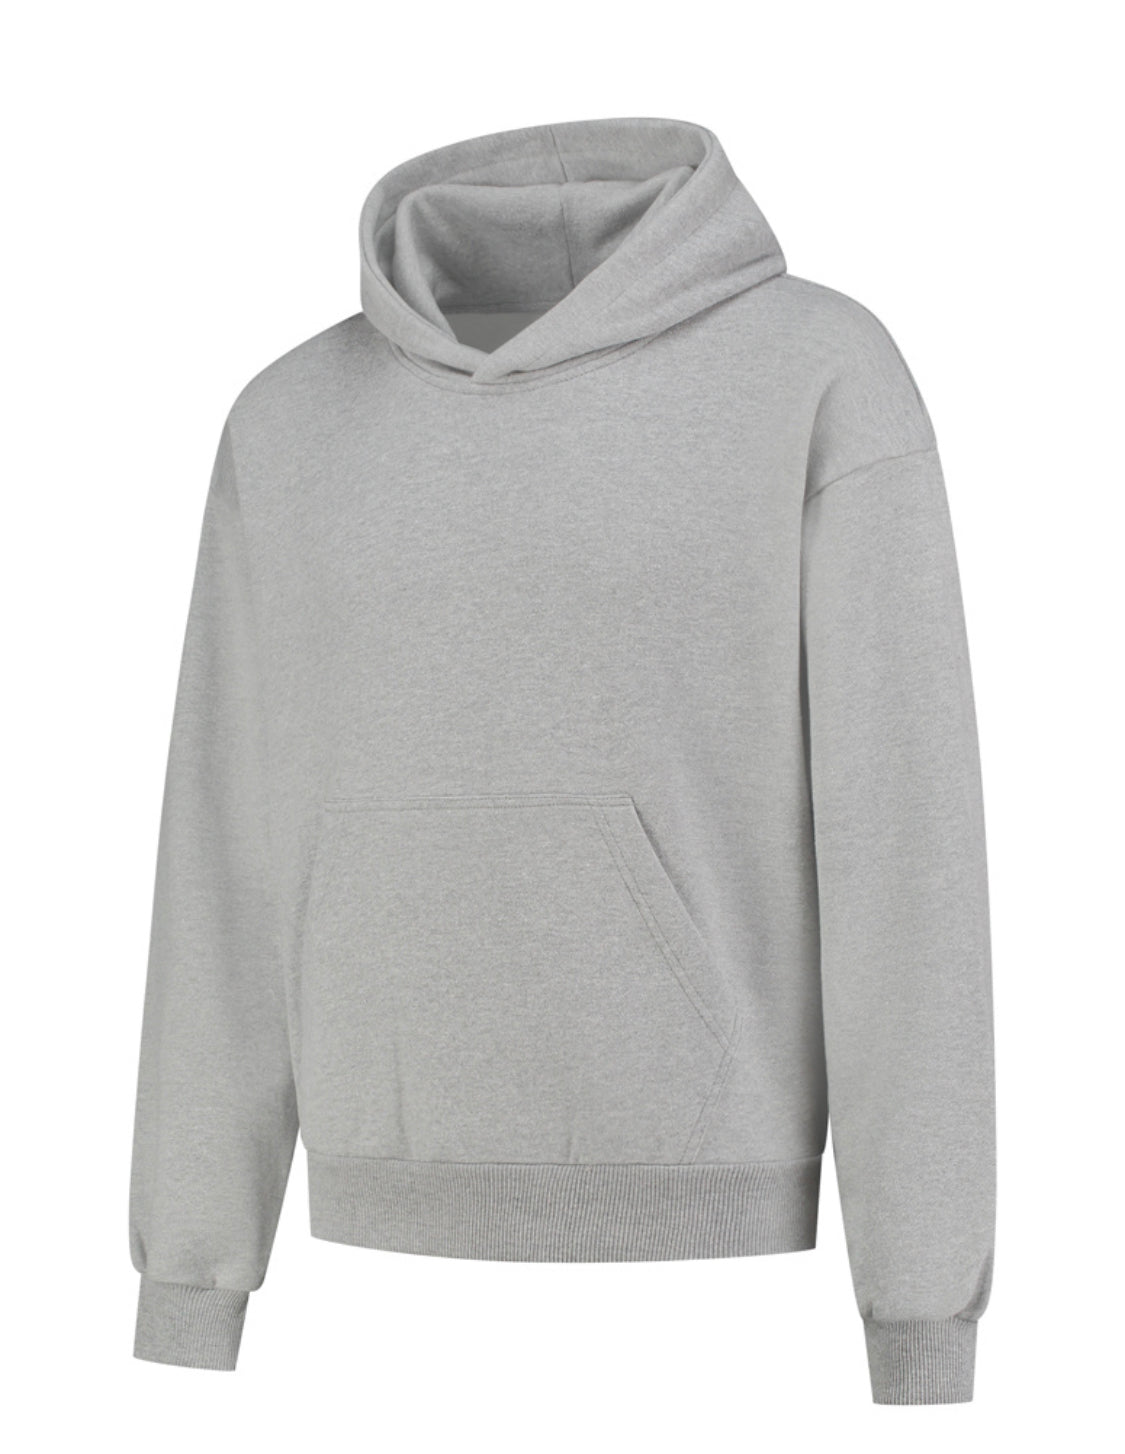 CONCEPT R - ESSENTIAL HOODIE GRAY